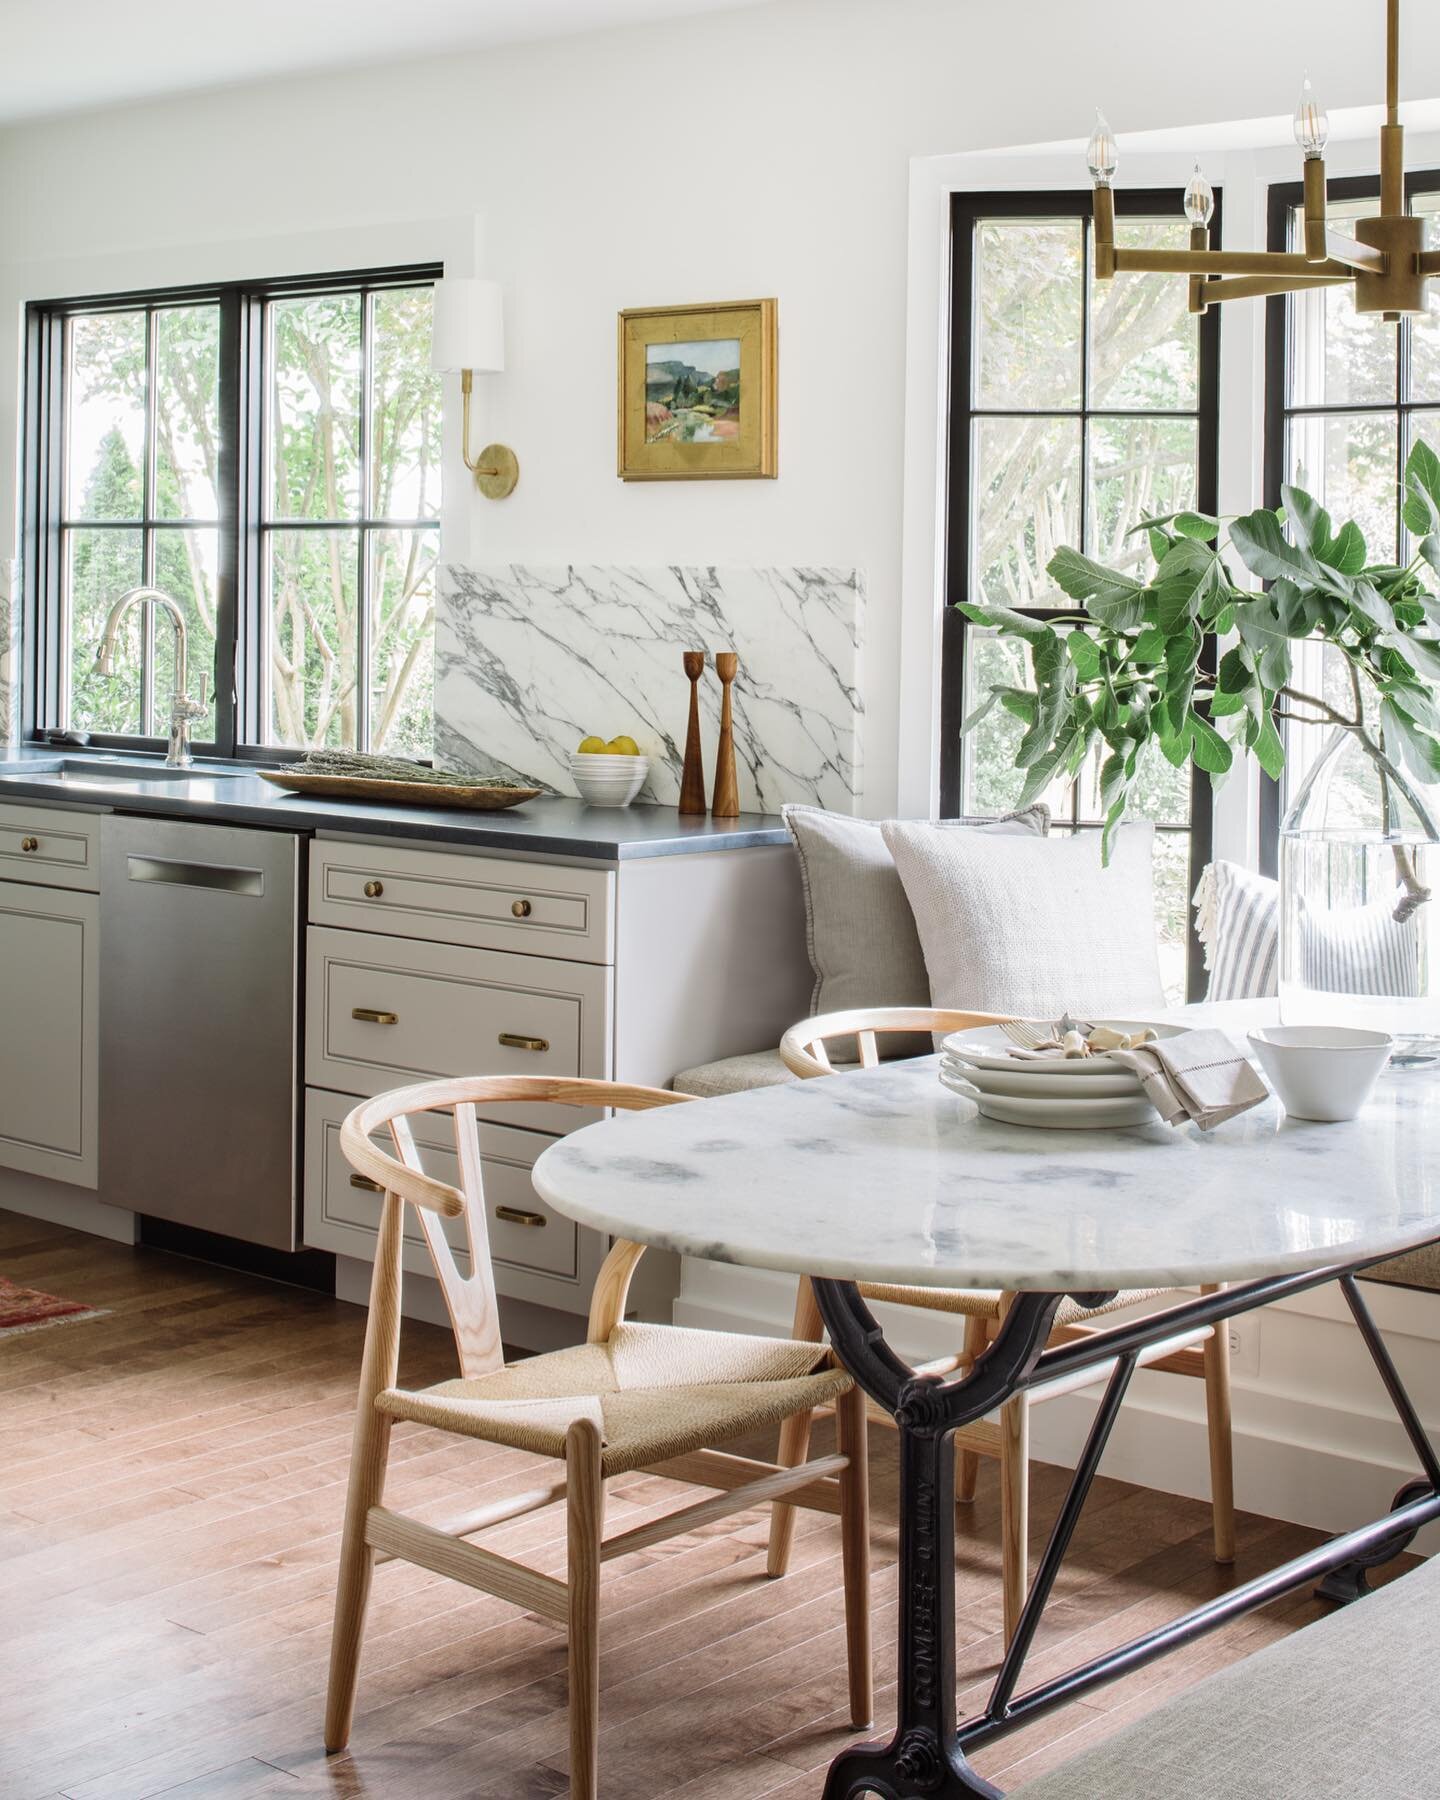 If you are planning a kitchen remodel, here are some must-have elements to consider:

1️⃣ Functional layout: The layout of your kitchen is key to its overall functionality. It should be designed in a way that makes it easy to move around and access d